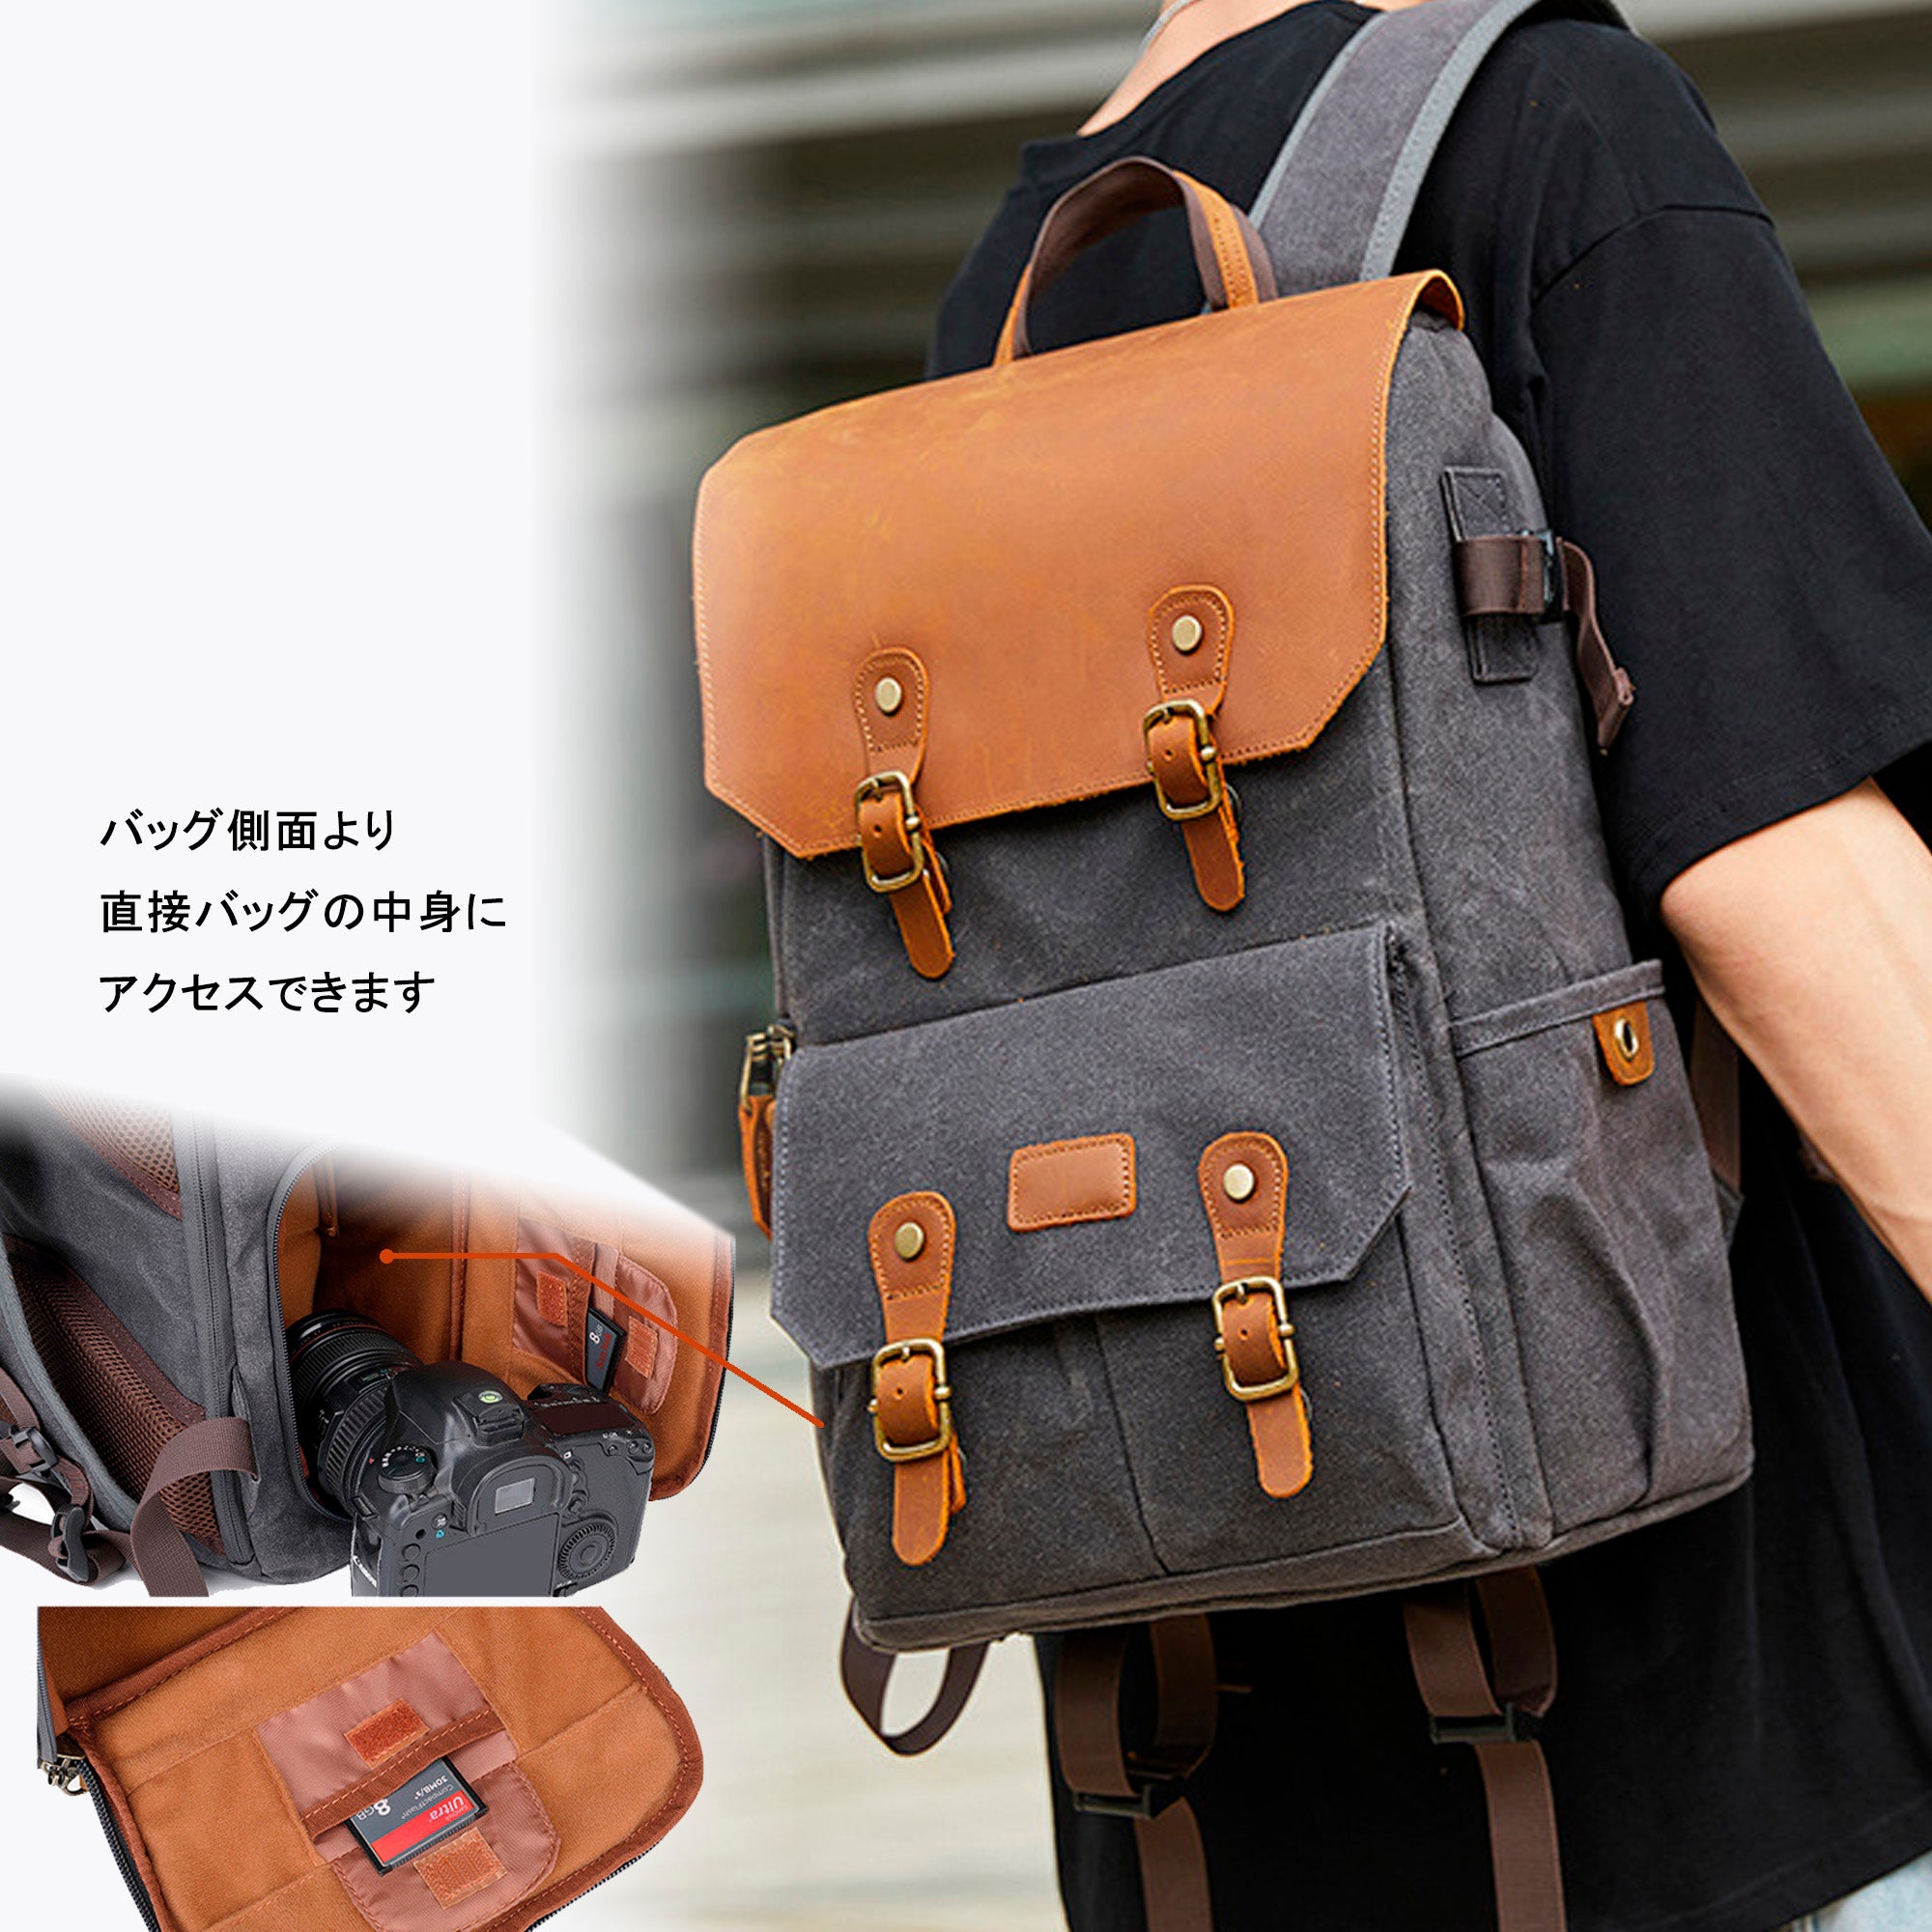 Oiled Leather × Classical BACKPACK